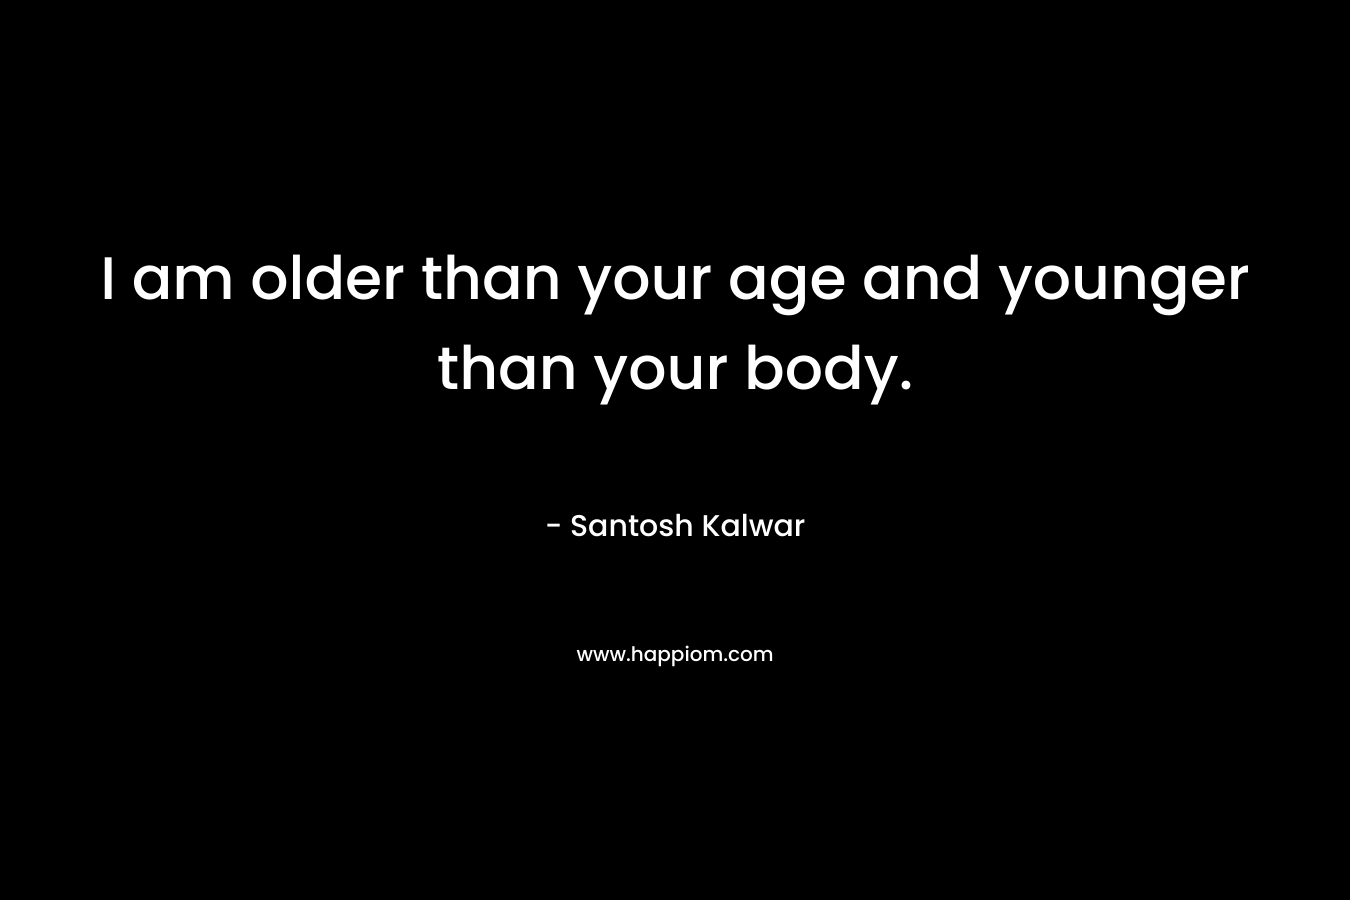 I am older than your age and younger than your body. – Santosh Kalwar